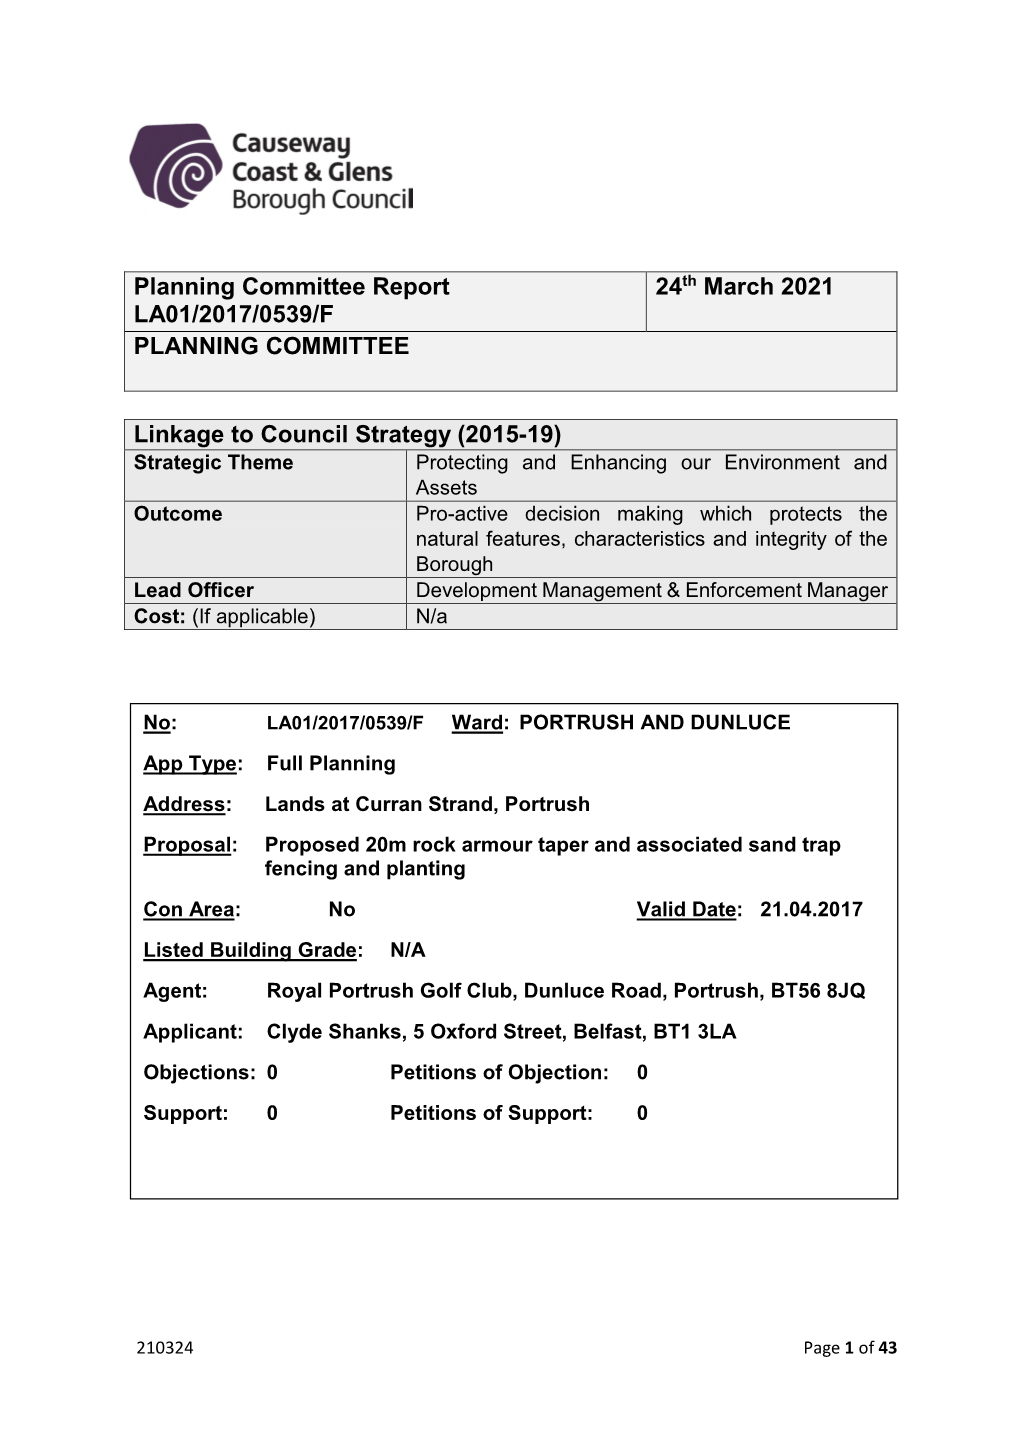 Planning Committee Report LA01/2017/0539/F 24Th March